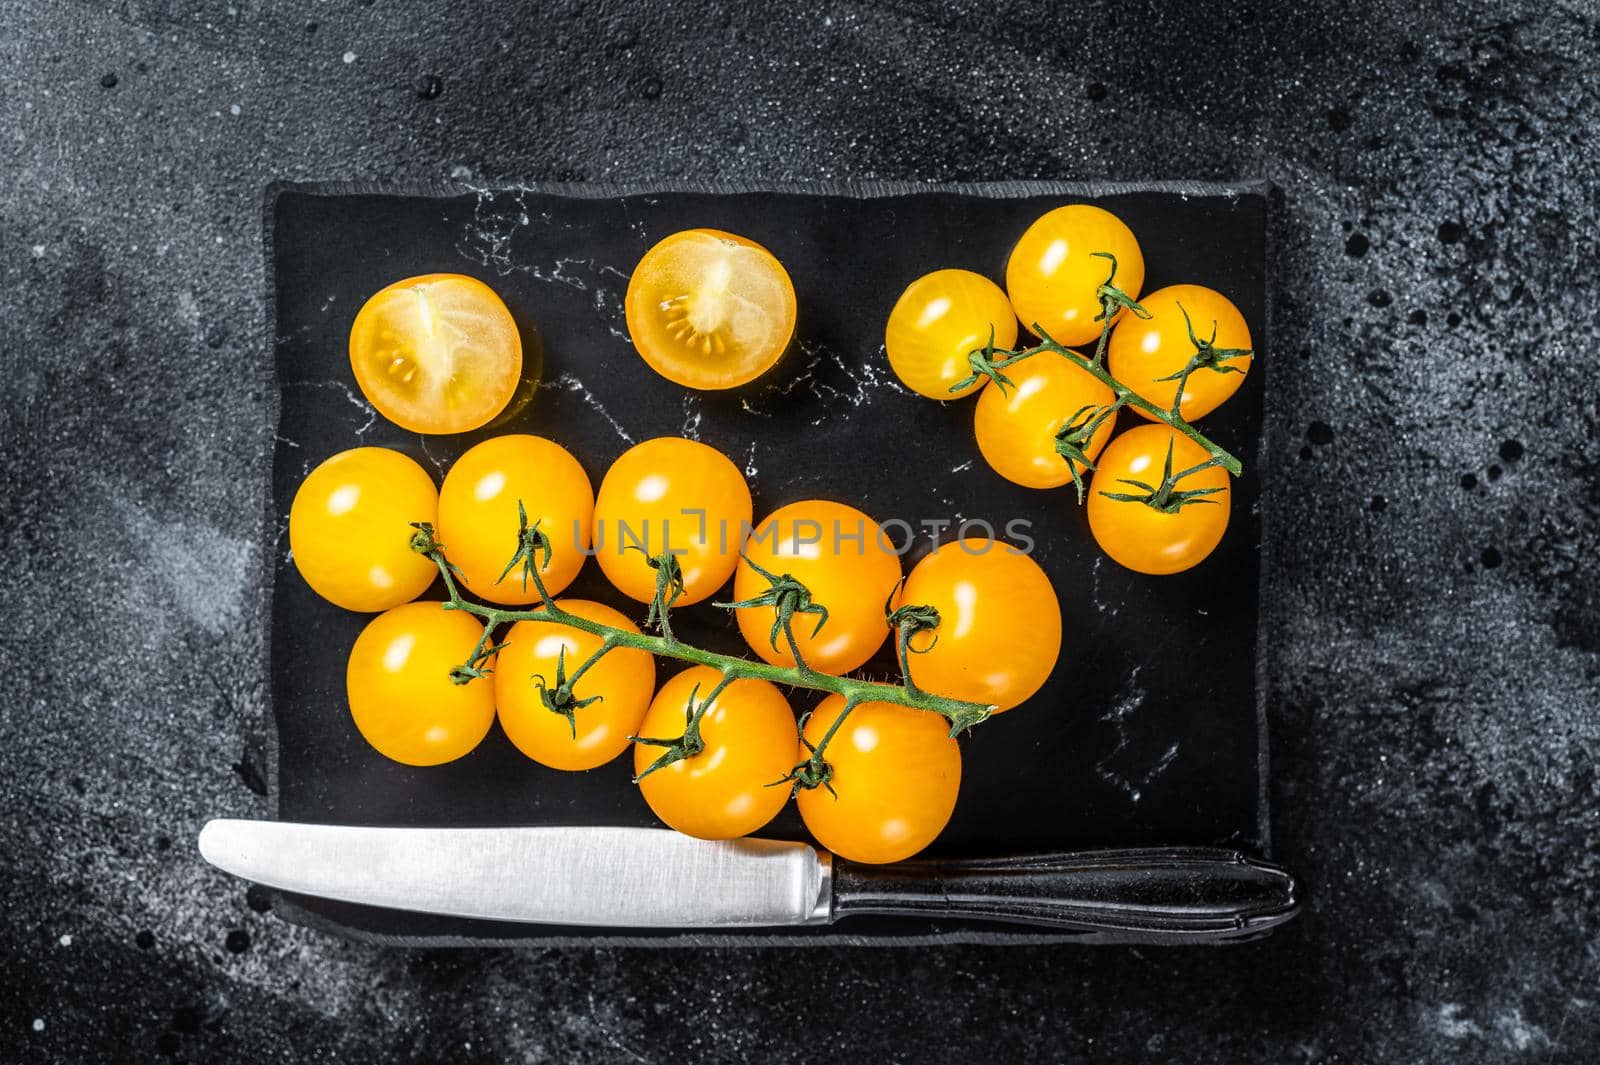 Bunch of yellow cherry tomato on a marble board. Black background. Top view.